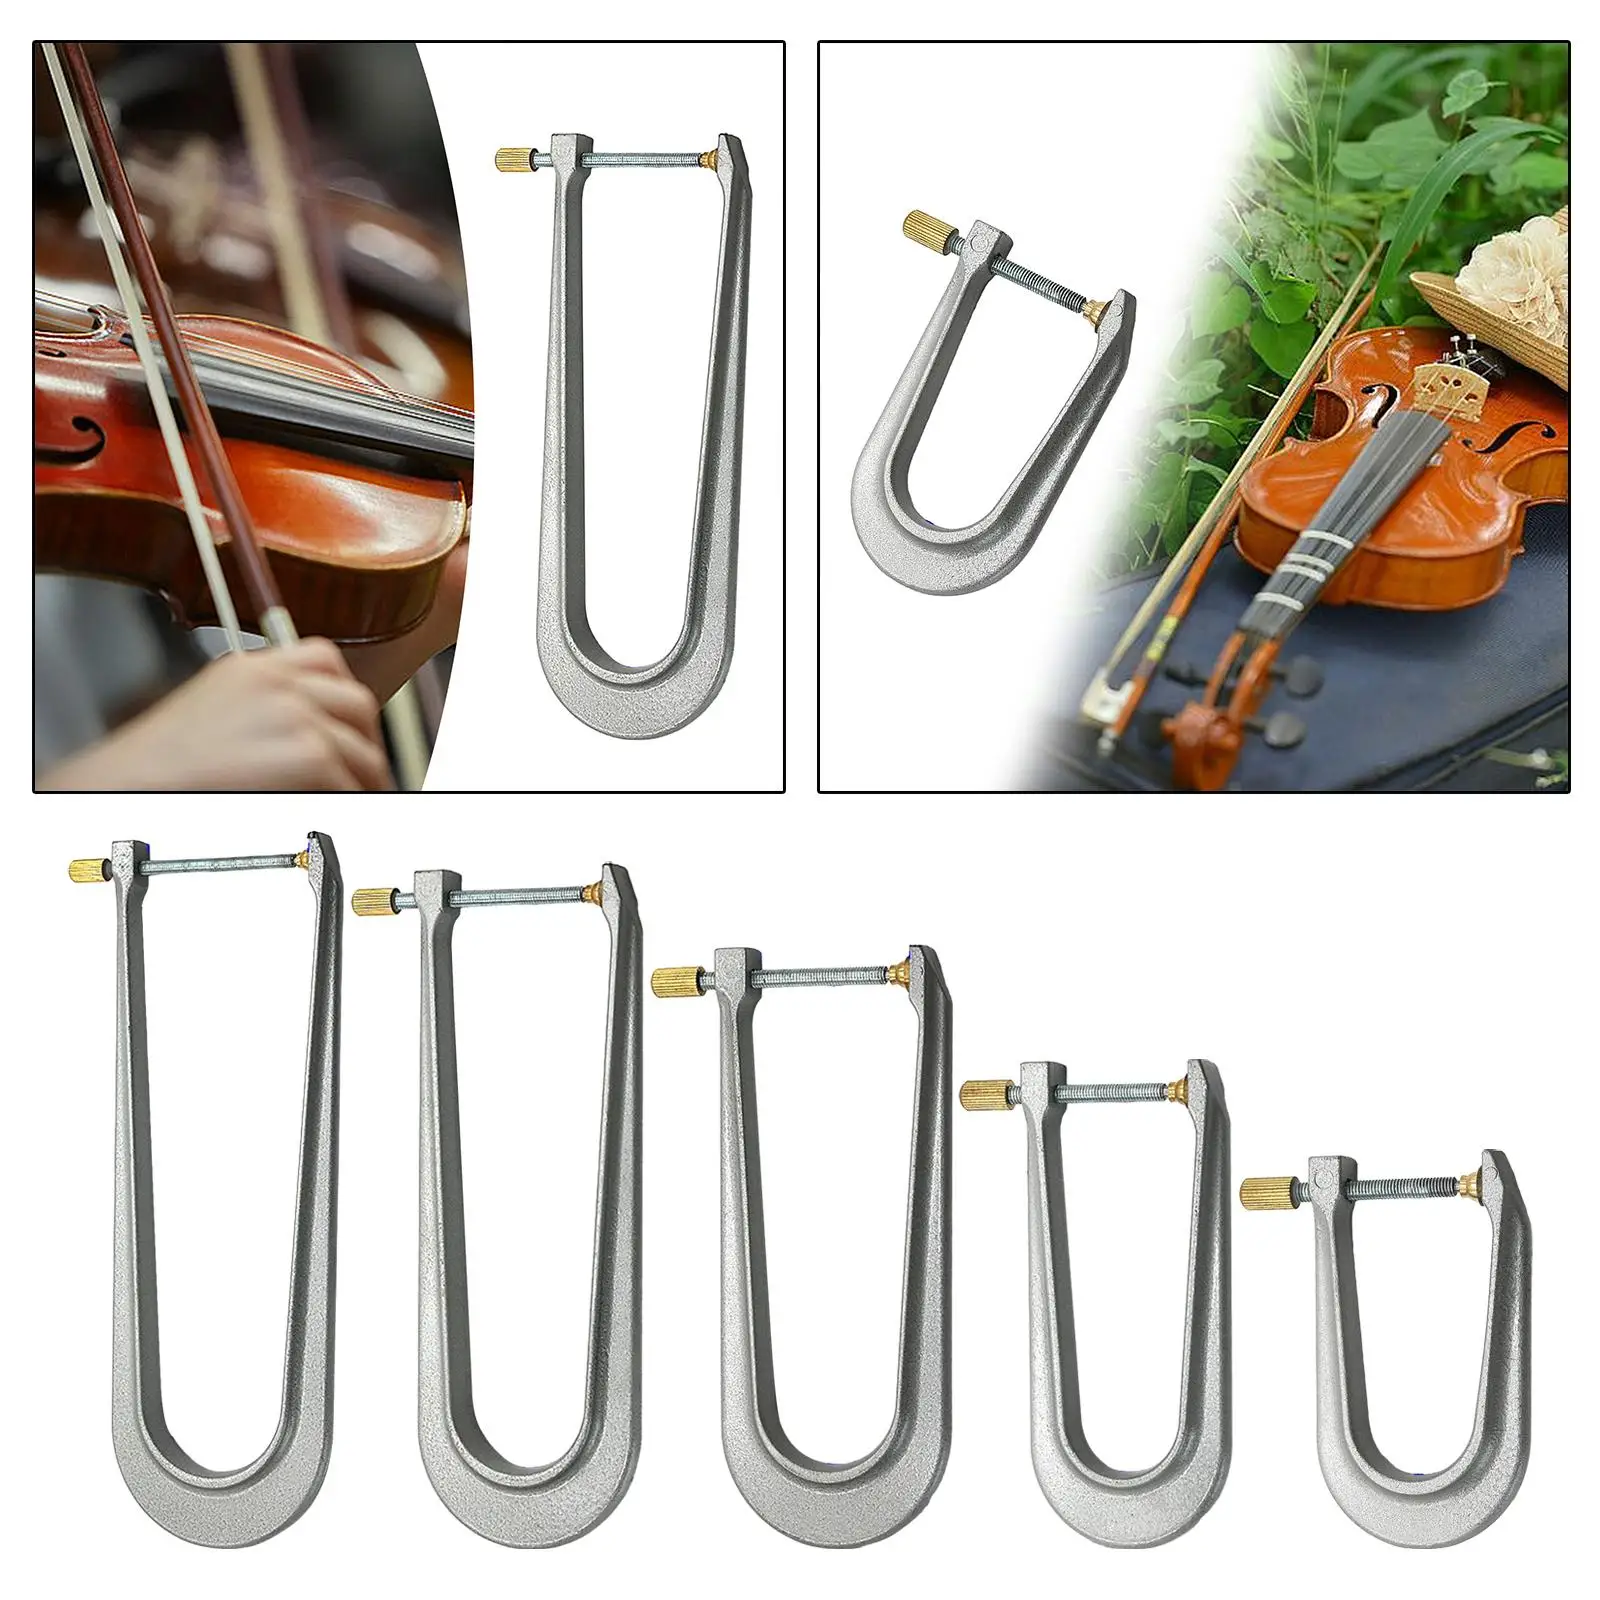 Violin Beam Clamp Instrument Making Tool Parts Easy to Use Violin Panel Back Plate Bracing Clip Reliable Bracing Bonding Tools